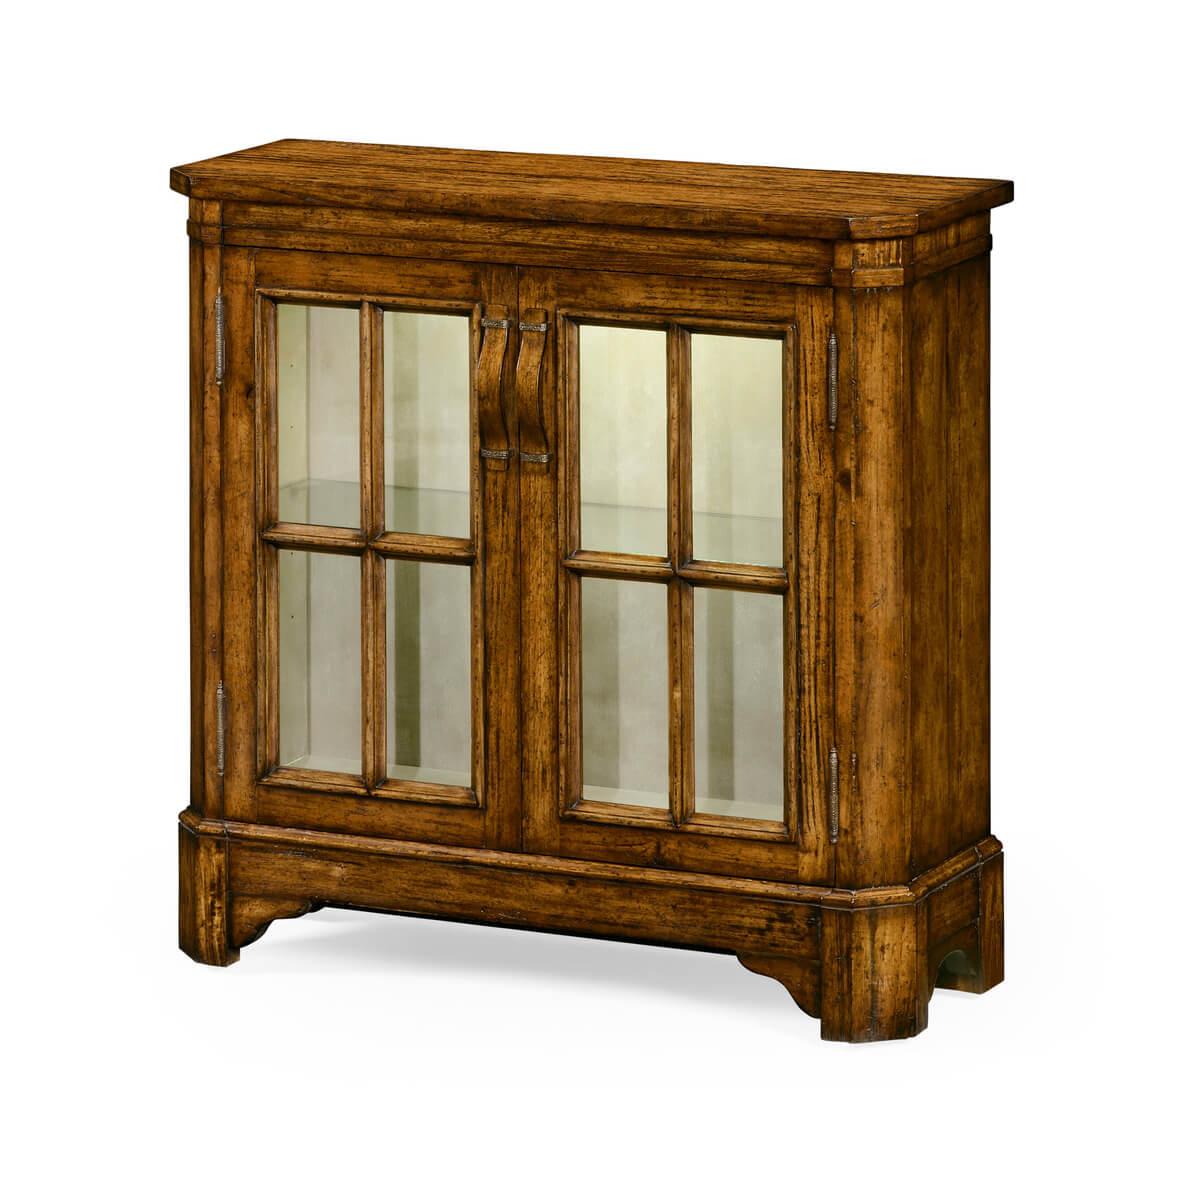 English country style antiqued walnut glazed low wall bookcase with internal lighting, two doors, and adjustable glass shelves. Wooden strap handles with patinated brass details.

Dimensions: 35 5/8